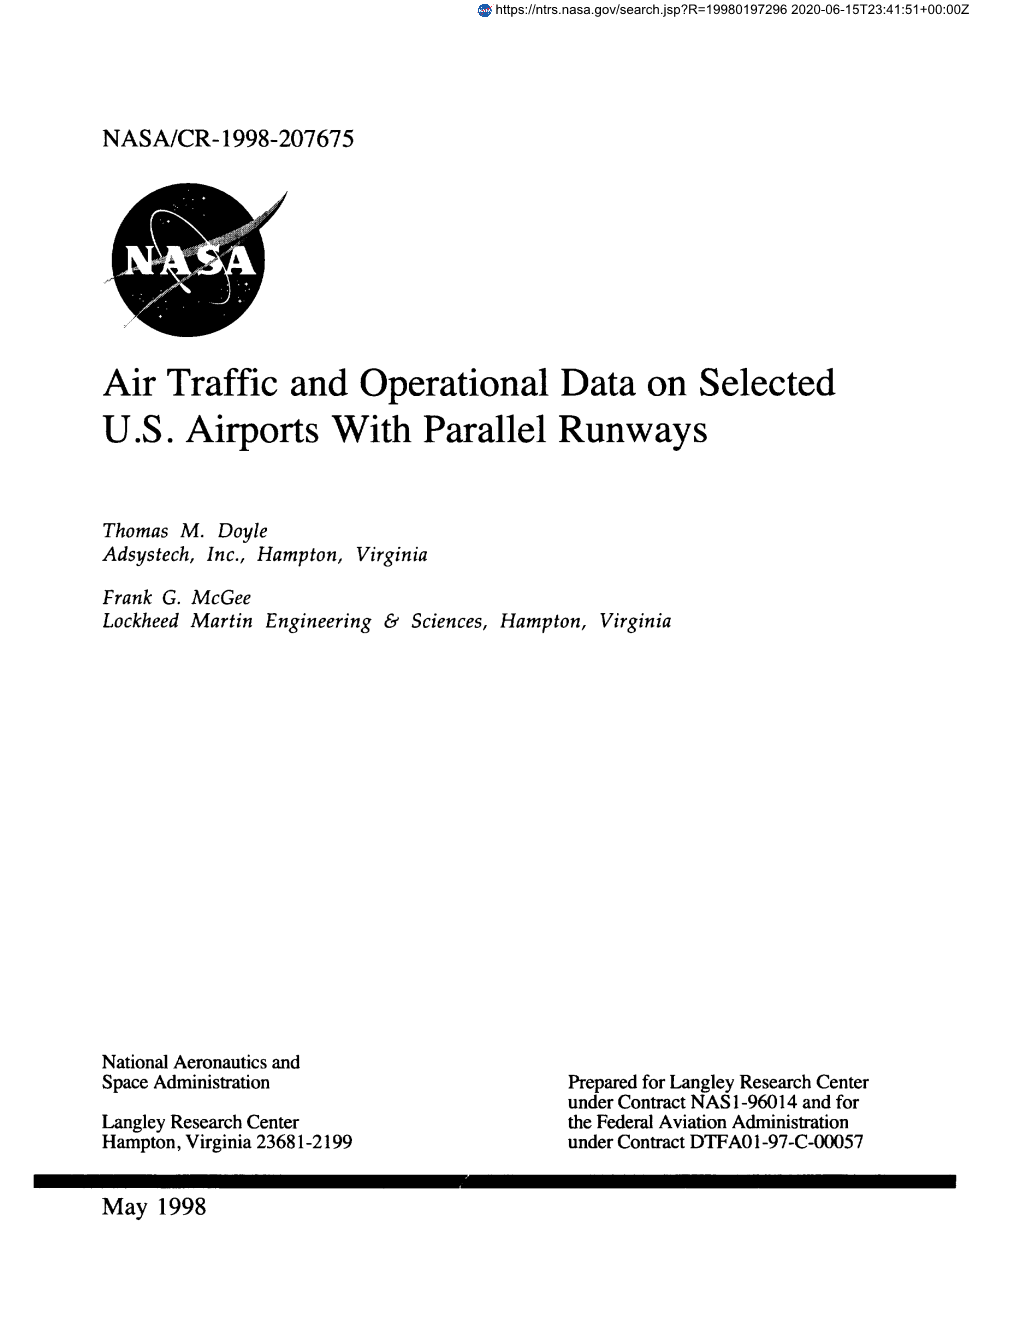 Air Traffic and Operational Data on Selected U.S. Airports with Parallel Runways